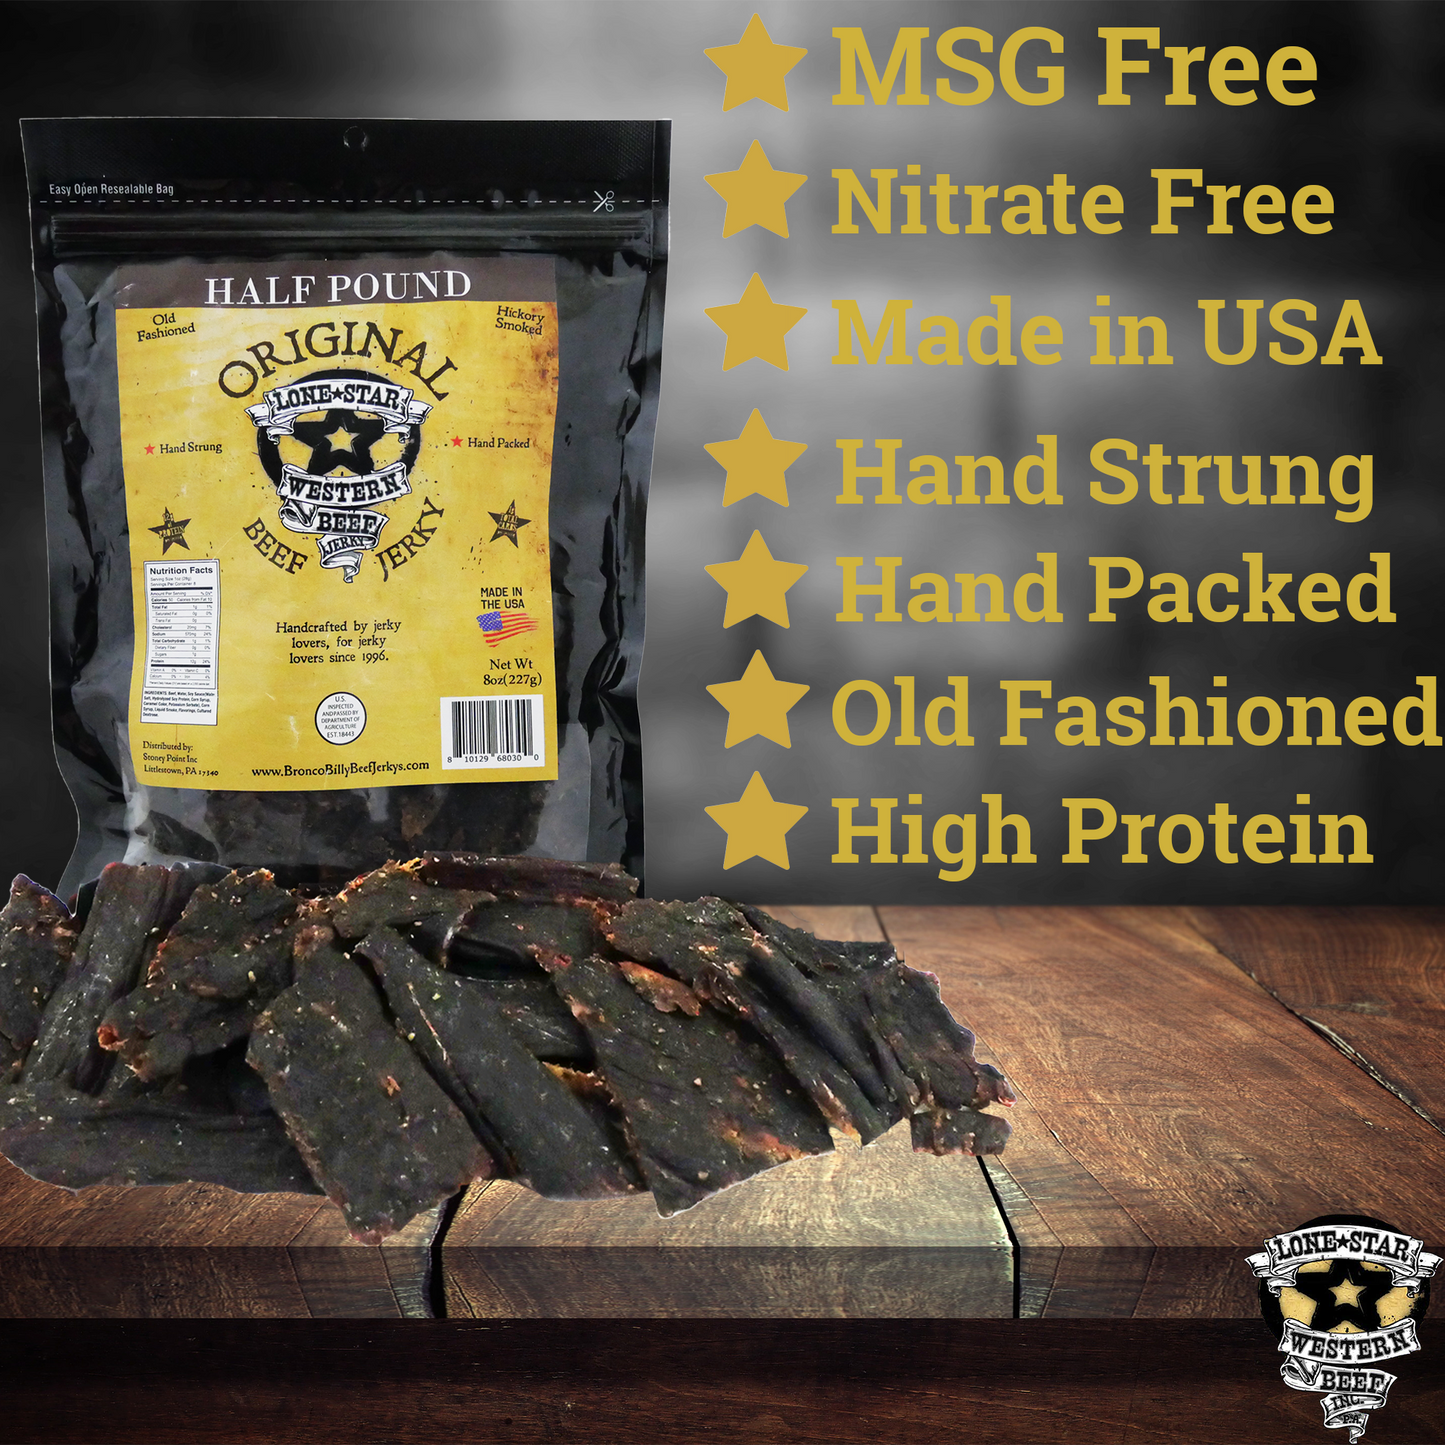 Lone Star Original Beef Jerky - Half Pound Resealable Bag - Classic Handcrafted Flavor - Made in The USA